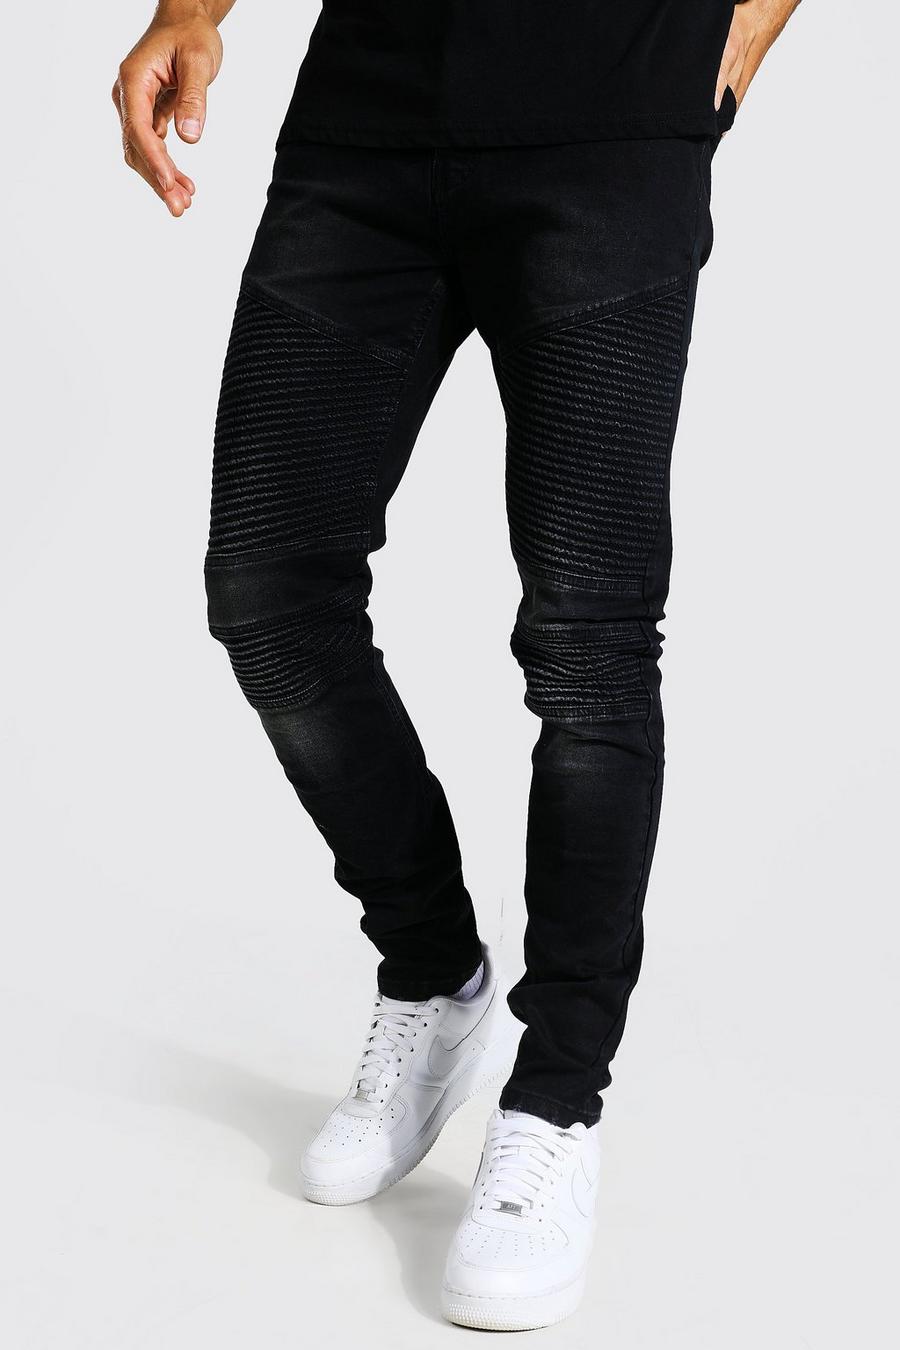 Jeans Tall stile Biker Skinny Fit Stretch con pannelli, Washed black